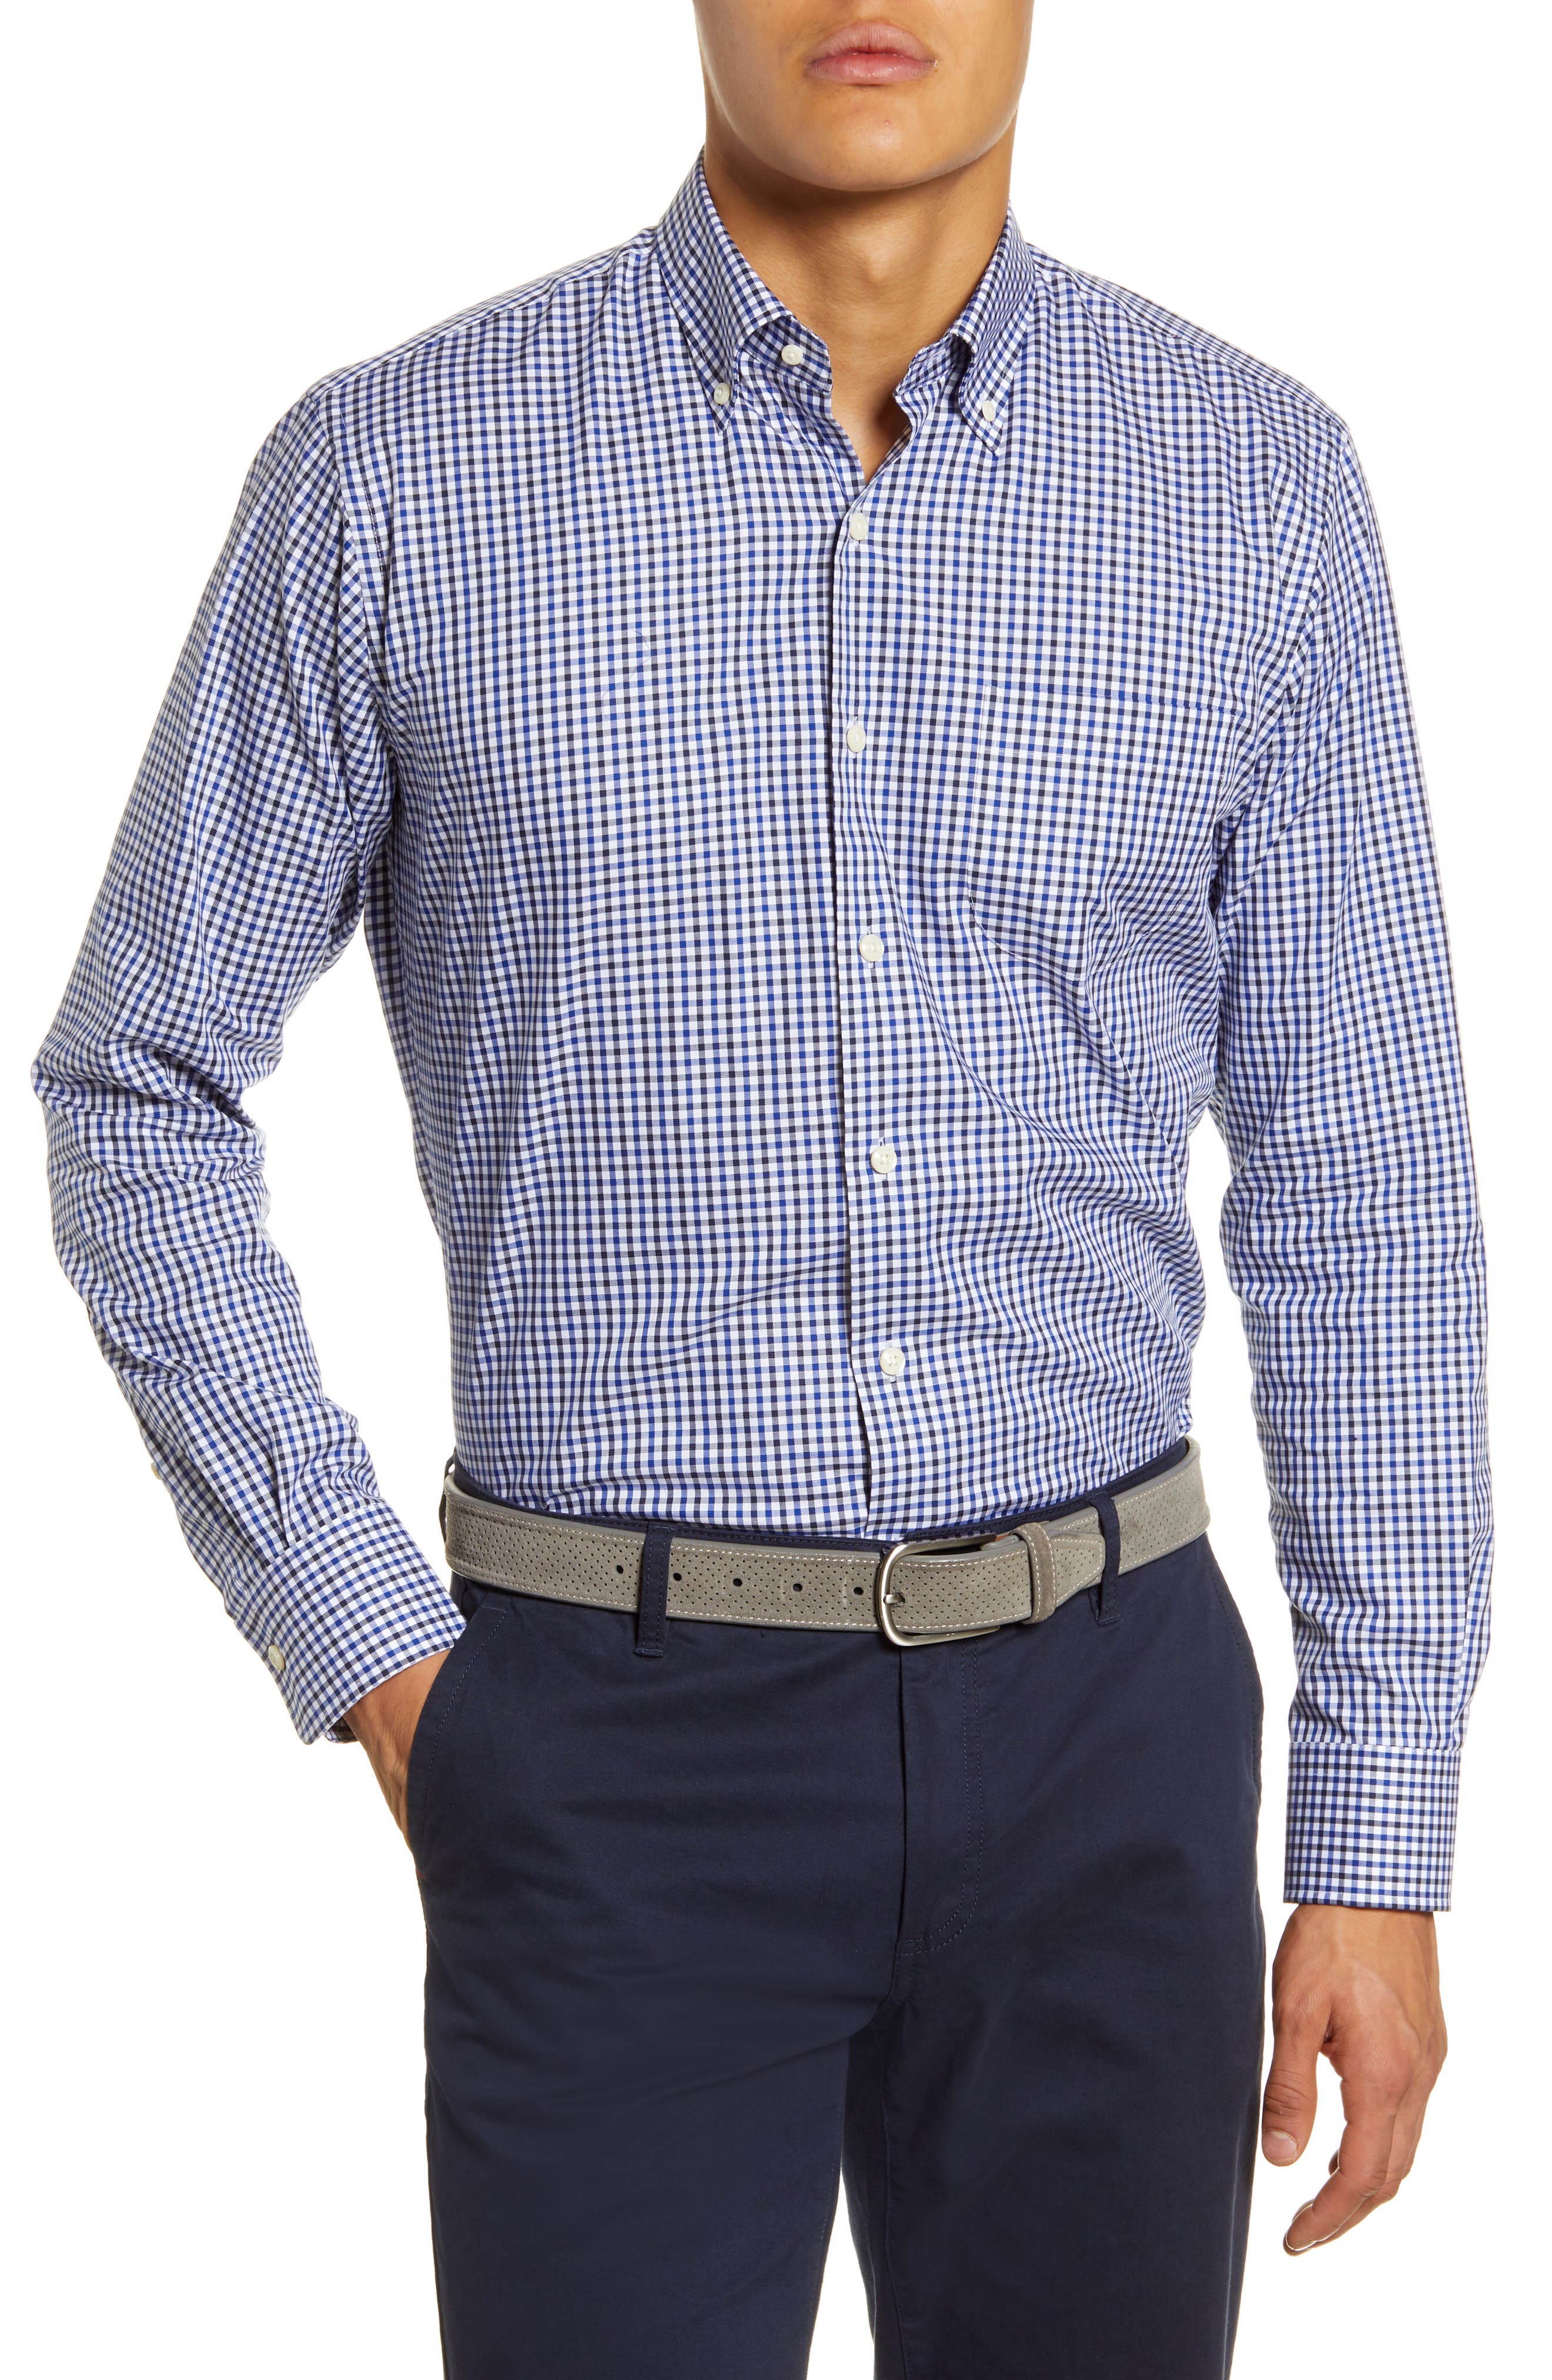 Men's Work \u0026 Business Casual Clothing 